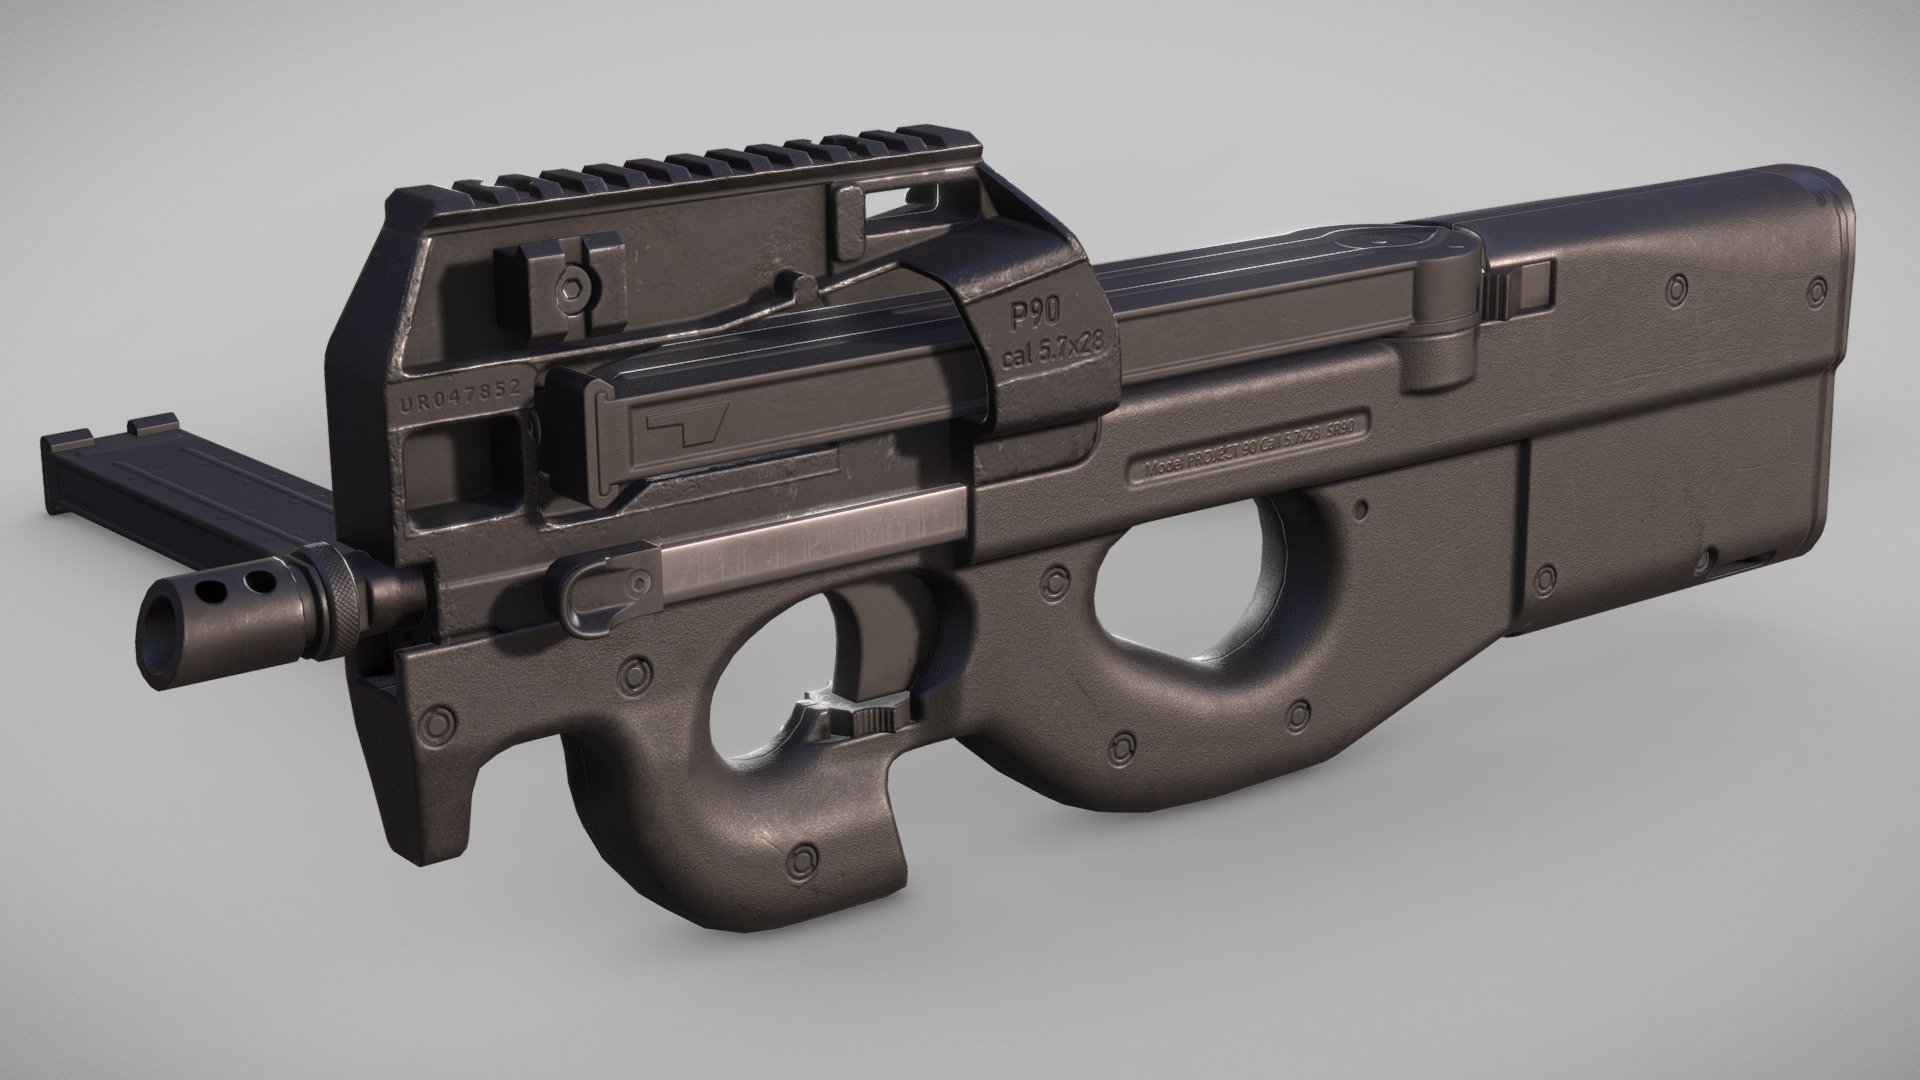 The classic P90 submachine gun (or PDW) of 5.7x28 caliber. Low-poly game-ready model 3d model